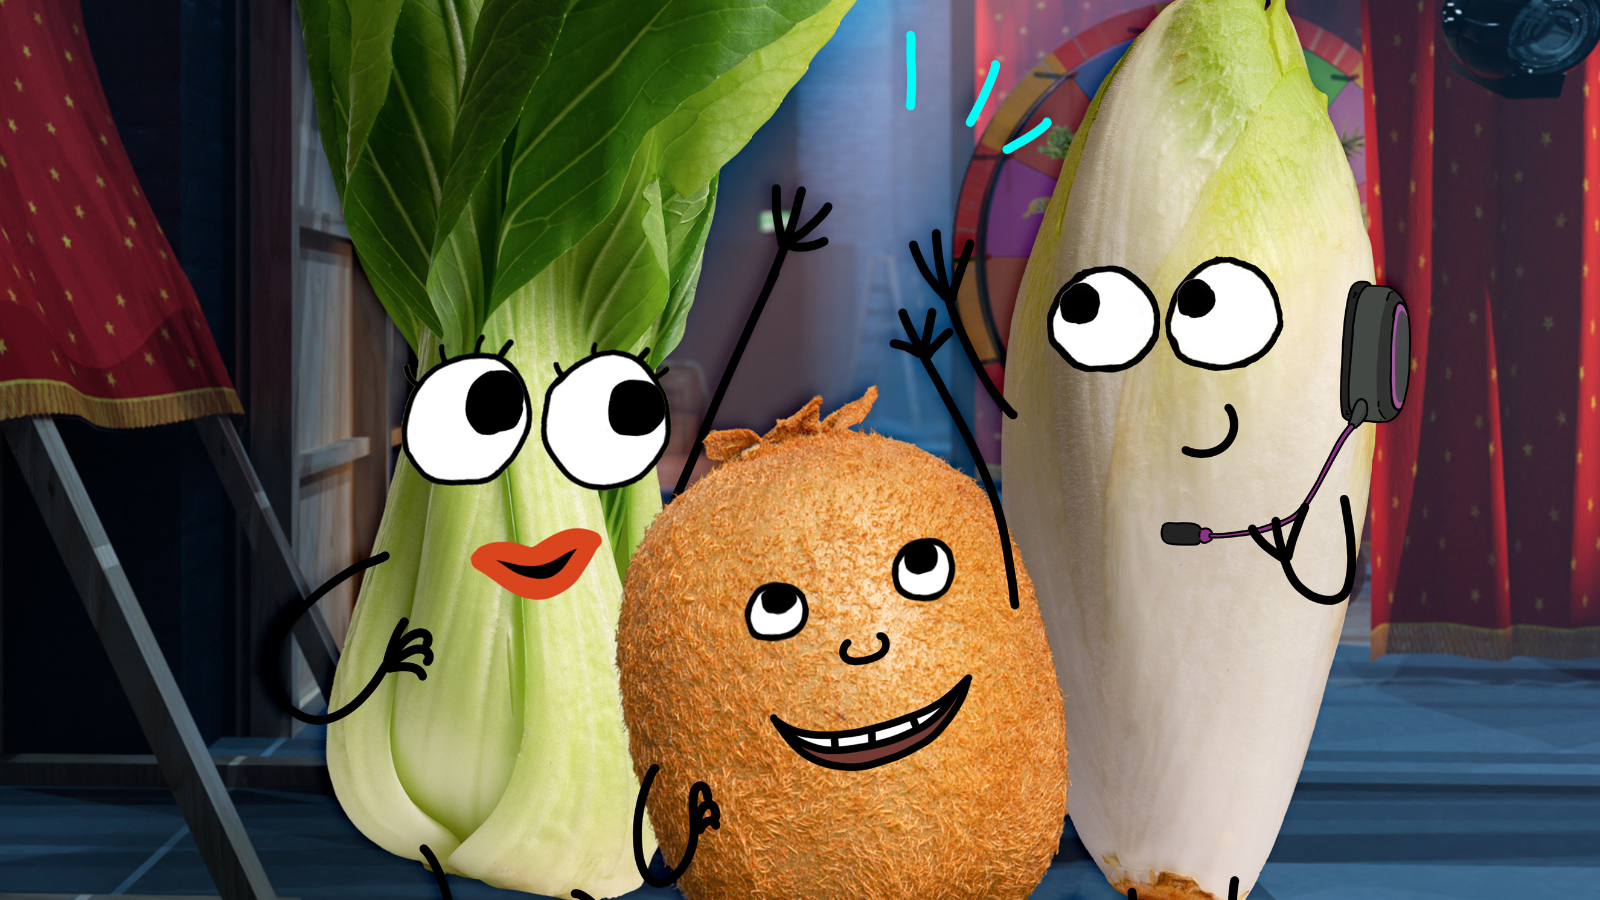 Still from toed and fruits. Animations of an organ, a leak and a turnip with eyes and mouths.